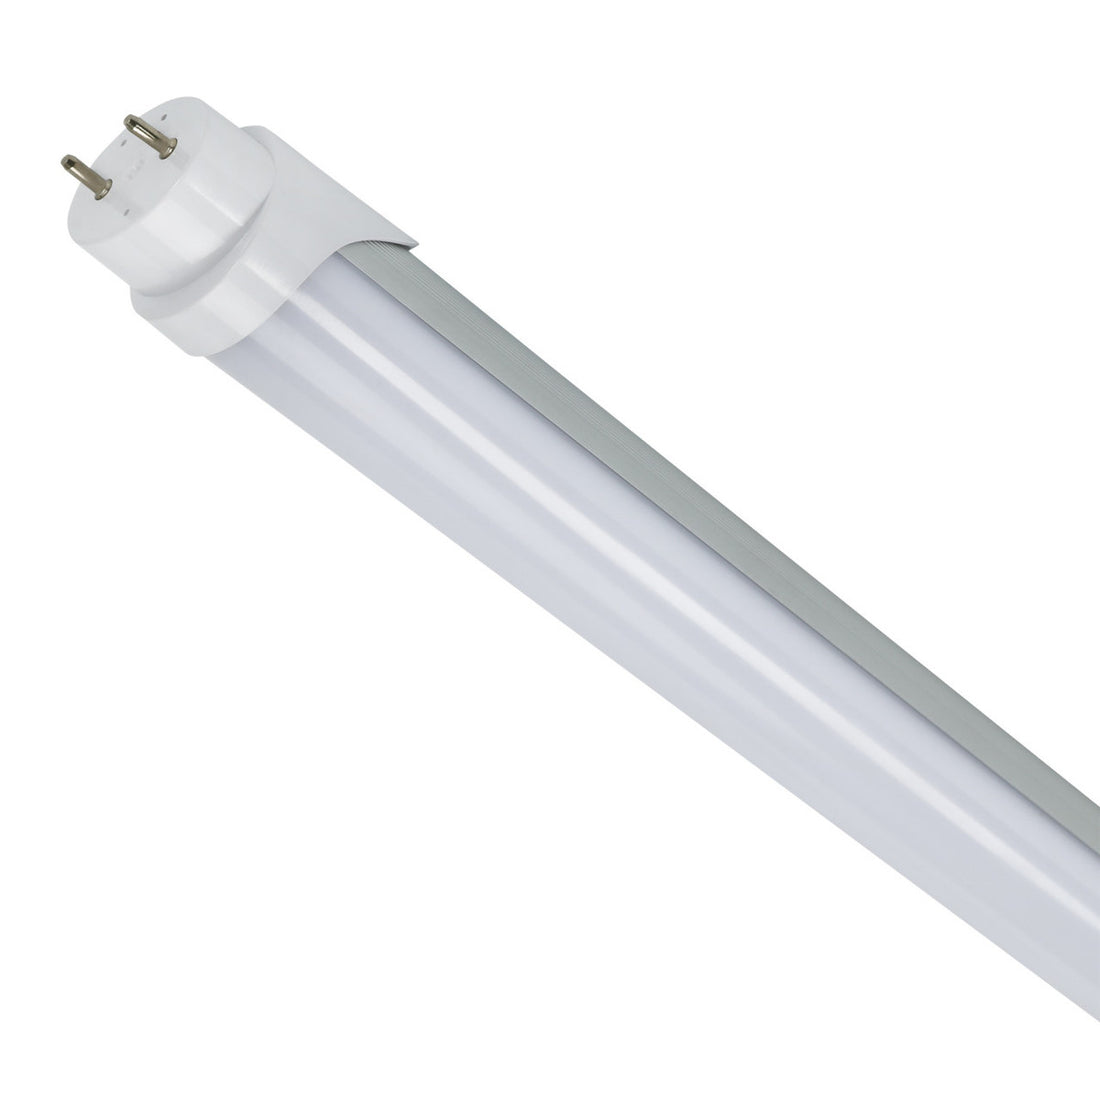 Wattage-Tunable LED Tube - 8W/10W/12W, 2ft, 5000K, 100-277VAC Input, Switch Dimming, 140¬∞ Beam Angle, Frosted Lens, Circular Aluminum Housing, Two-End Input - 42 Pack